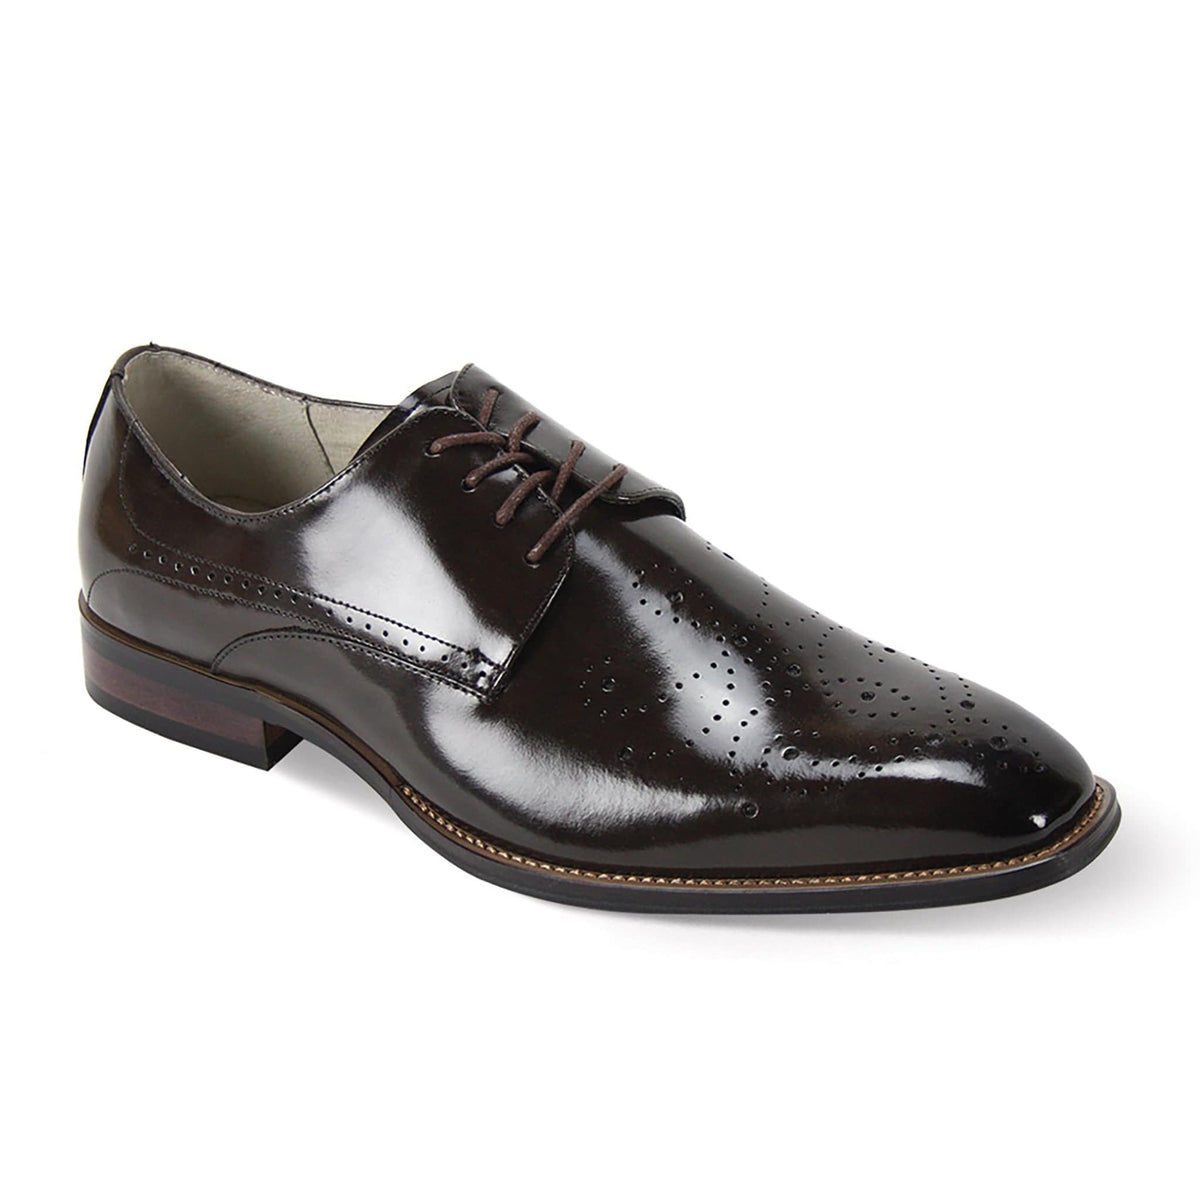 GIOVANNI LEATHER SHOES FT CH BROWN / 7 GIOVANNI LEATHER SHOES-JOEL